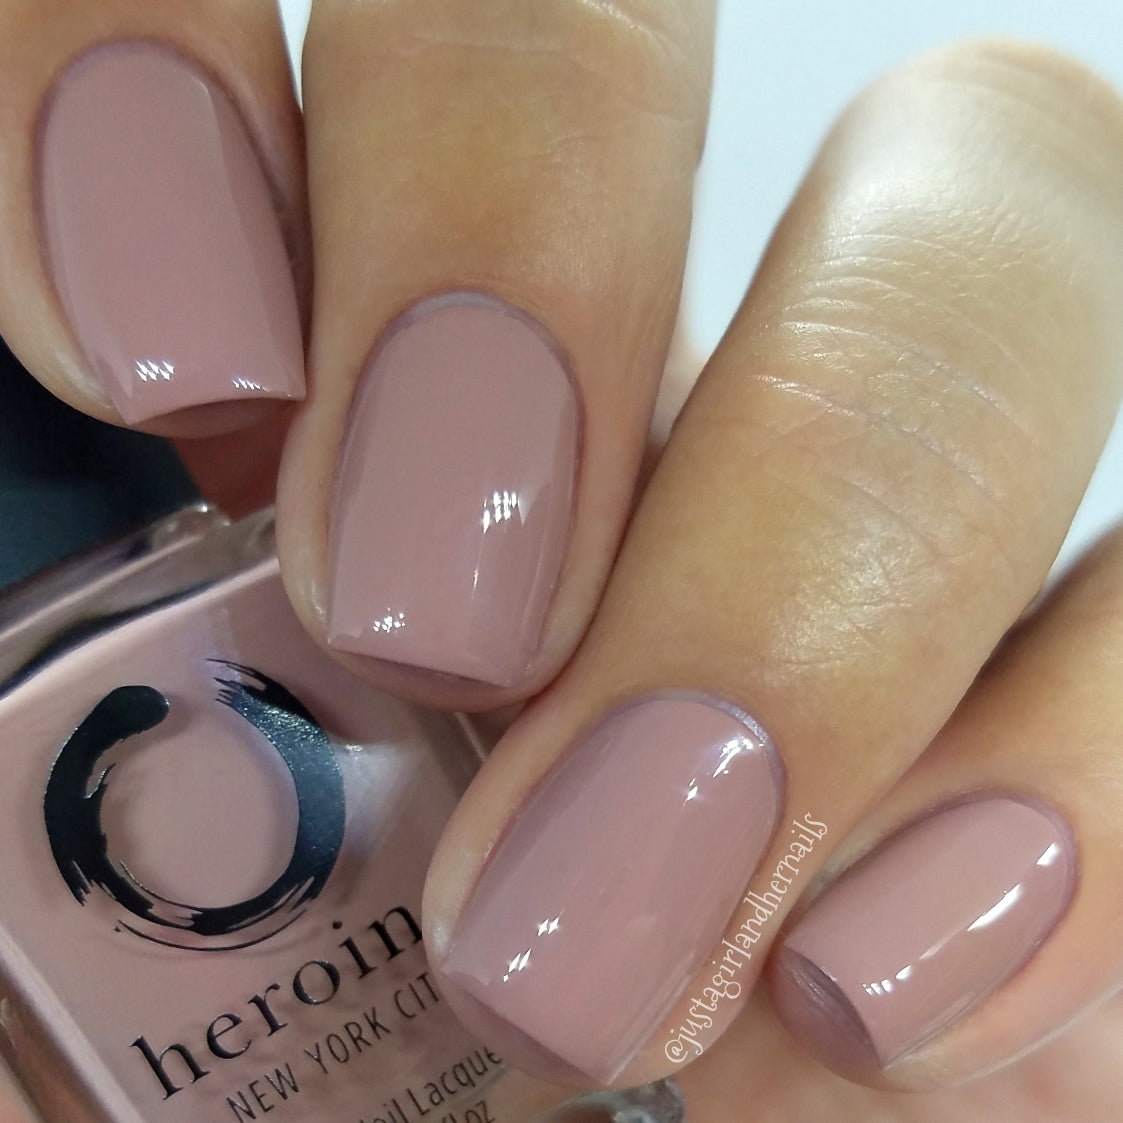 The Top 5 OPI Neutral Nail Polish Colors for an Effortlessly Chic Look –  RainyRoses